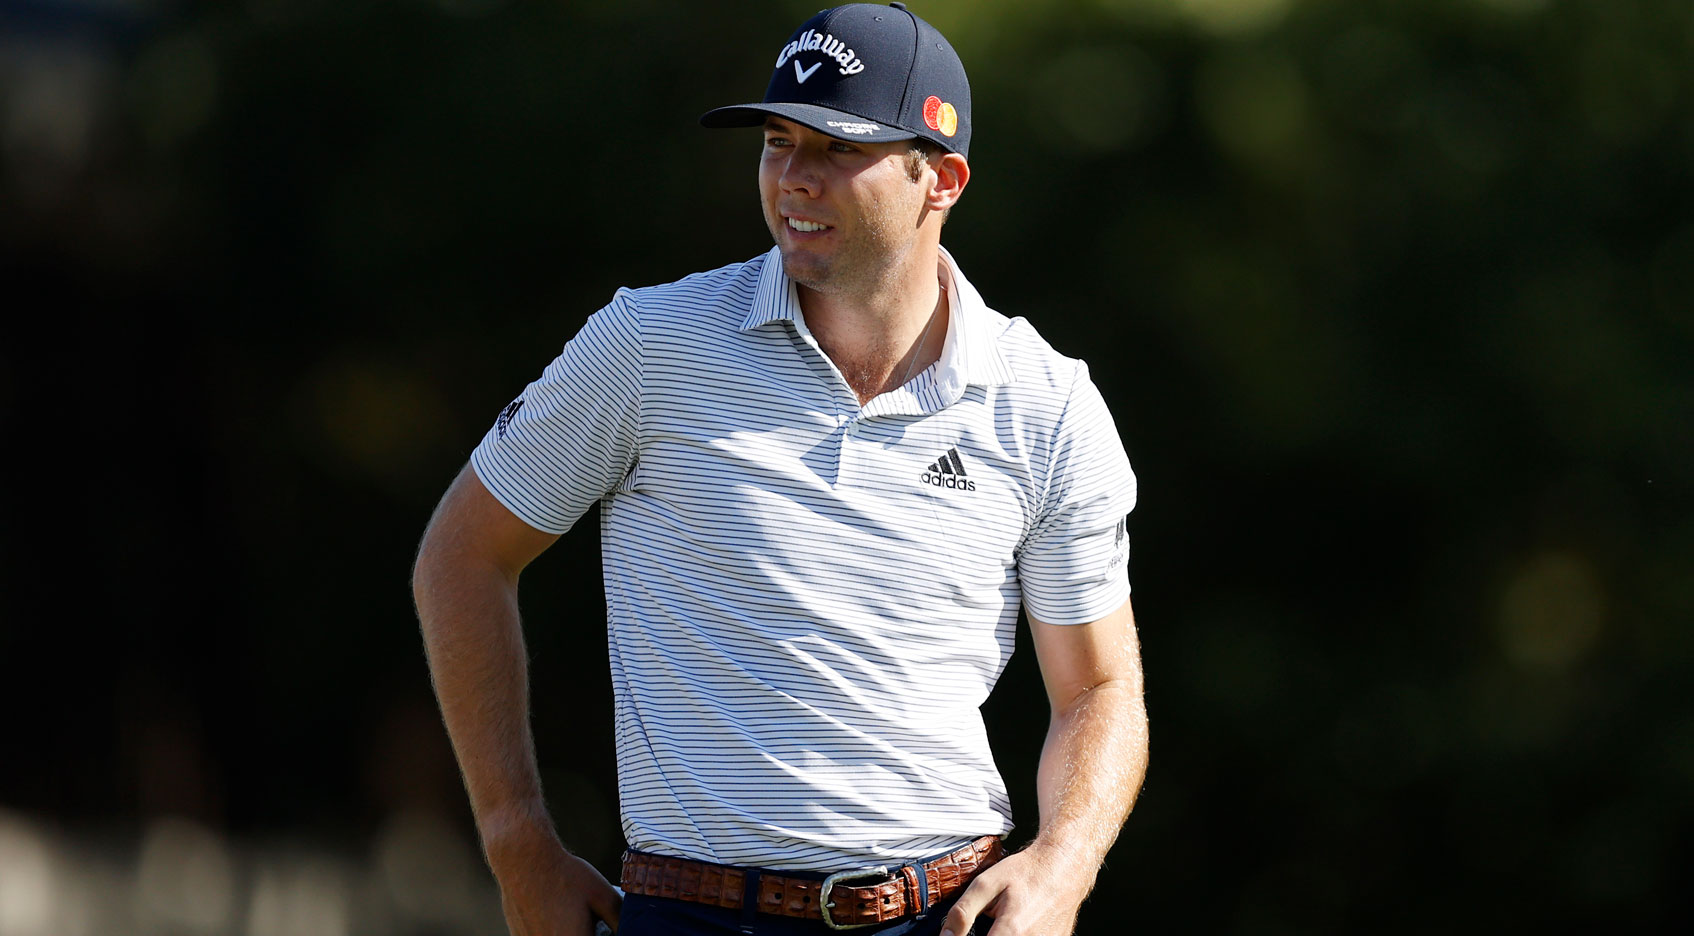 Sam Burns must hold off Dustin Johnson, Jason Day to get first TOUR win